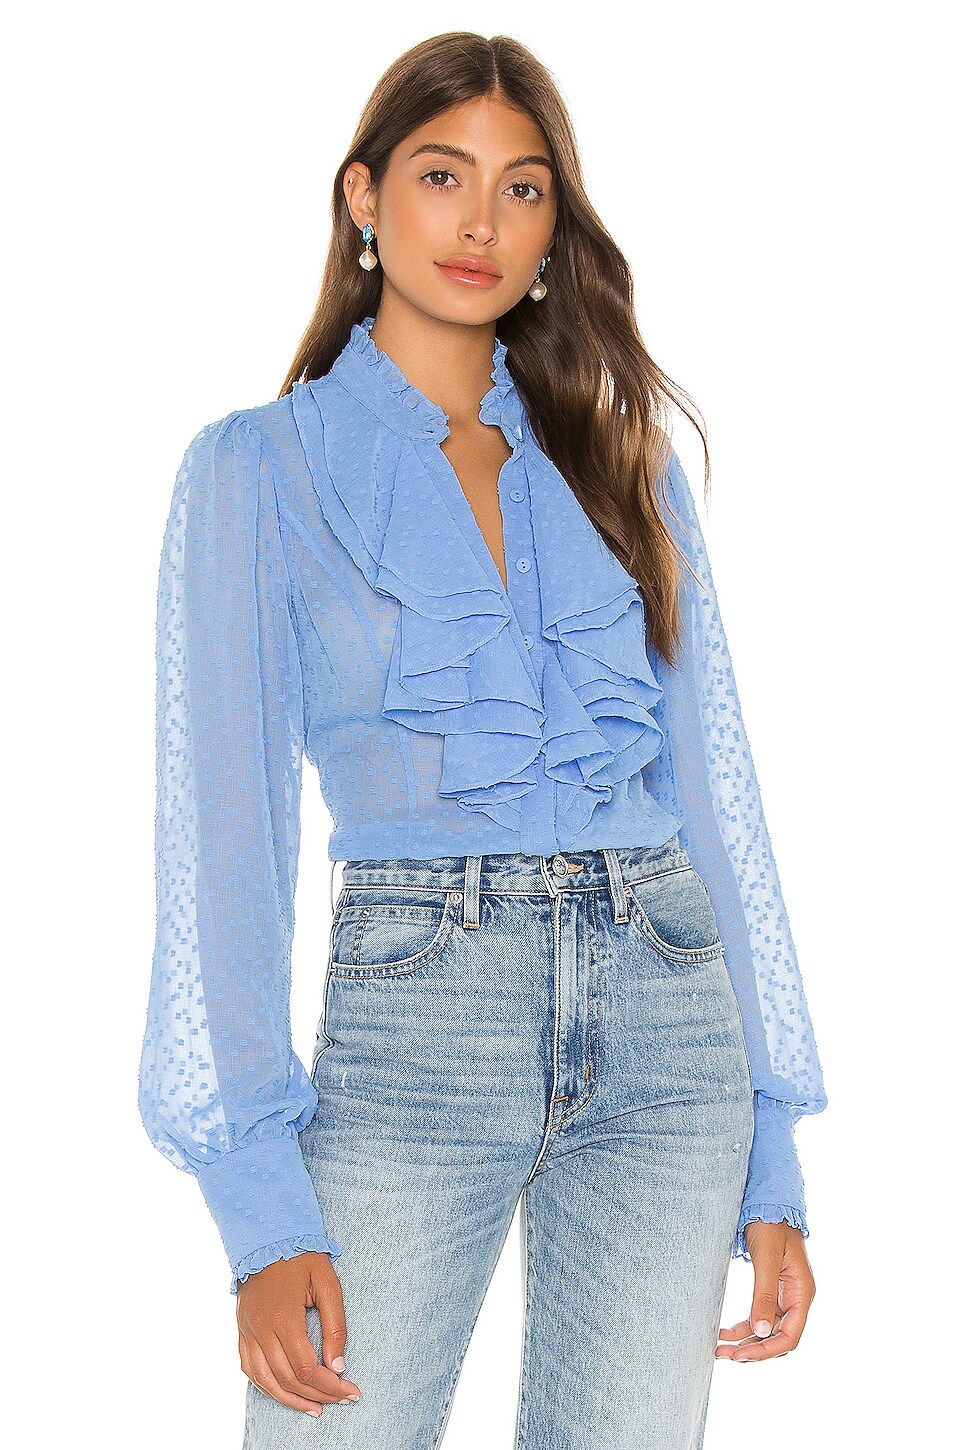 Alexis Benham Top in Blue Lace Embroidery | REVOLVE